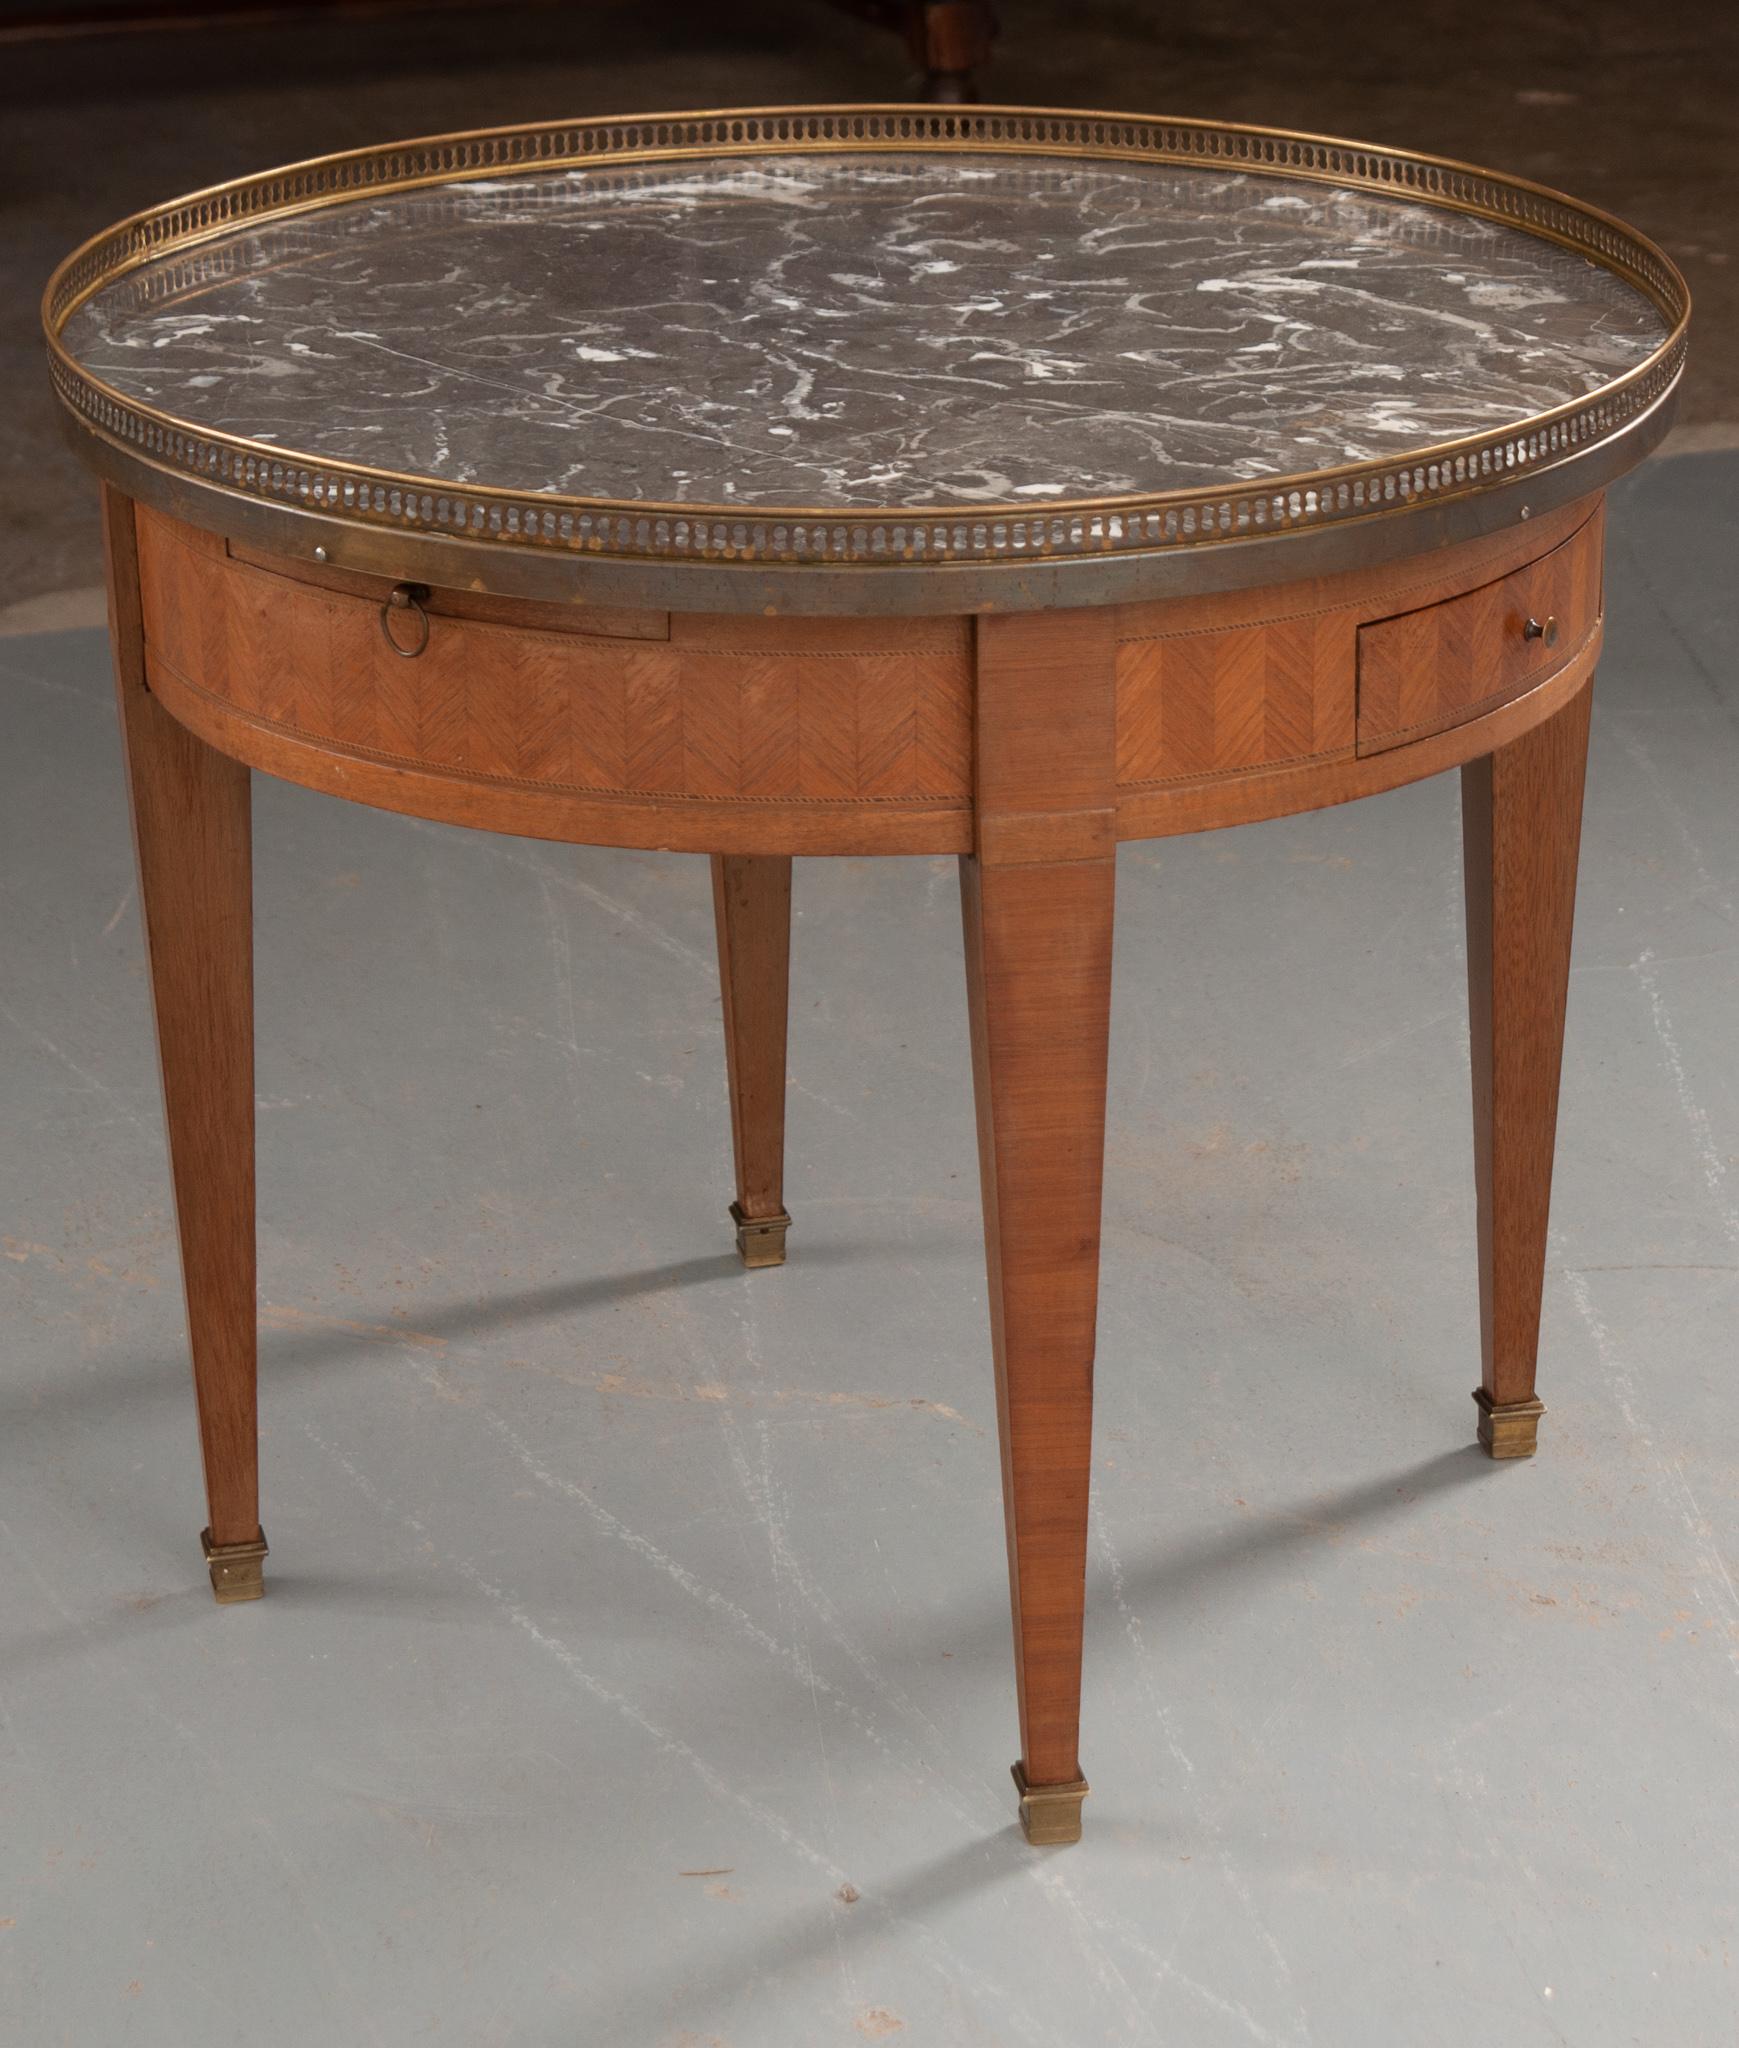 A nice example of a Louis XVI style marble-top guéridon coffee table, with brass gallery. The top is gray Saint-Anne marble with reticulated brass gallery resting over an apron of herringbone inlay wood with two drawers and two leather-topped